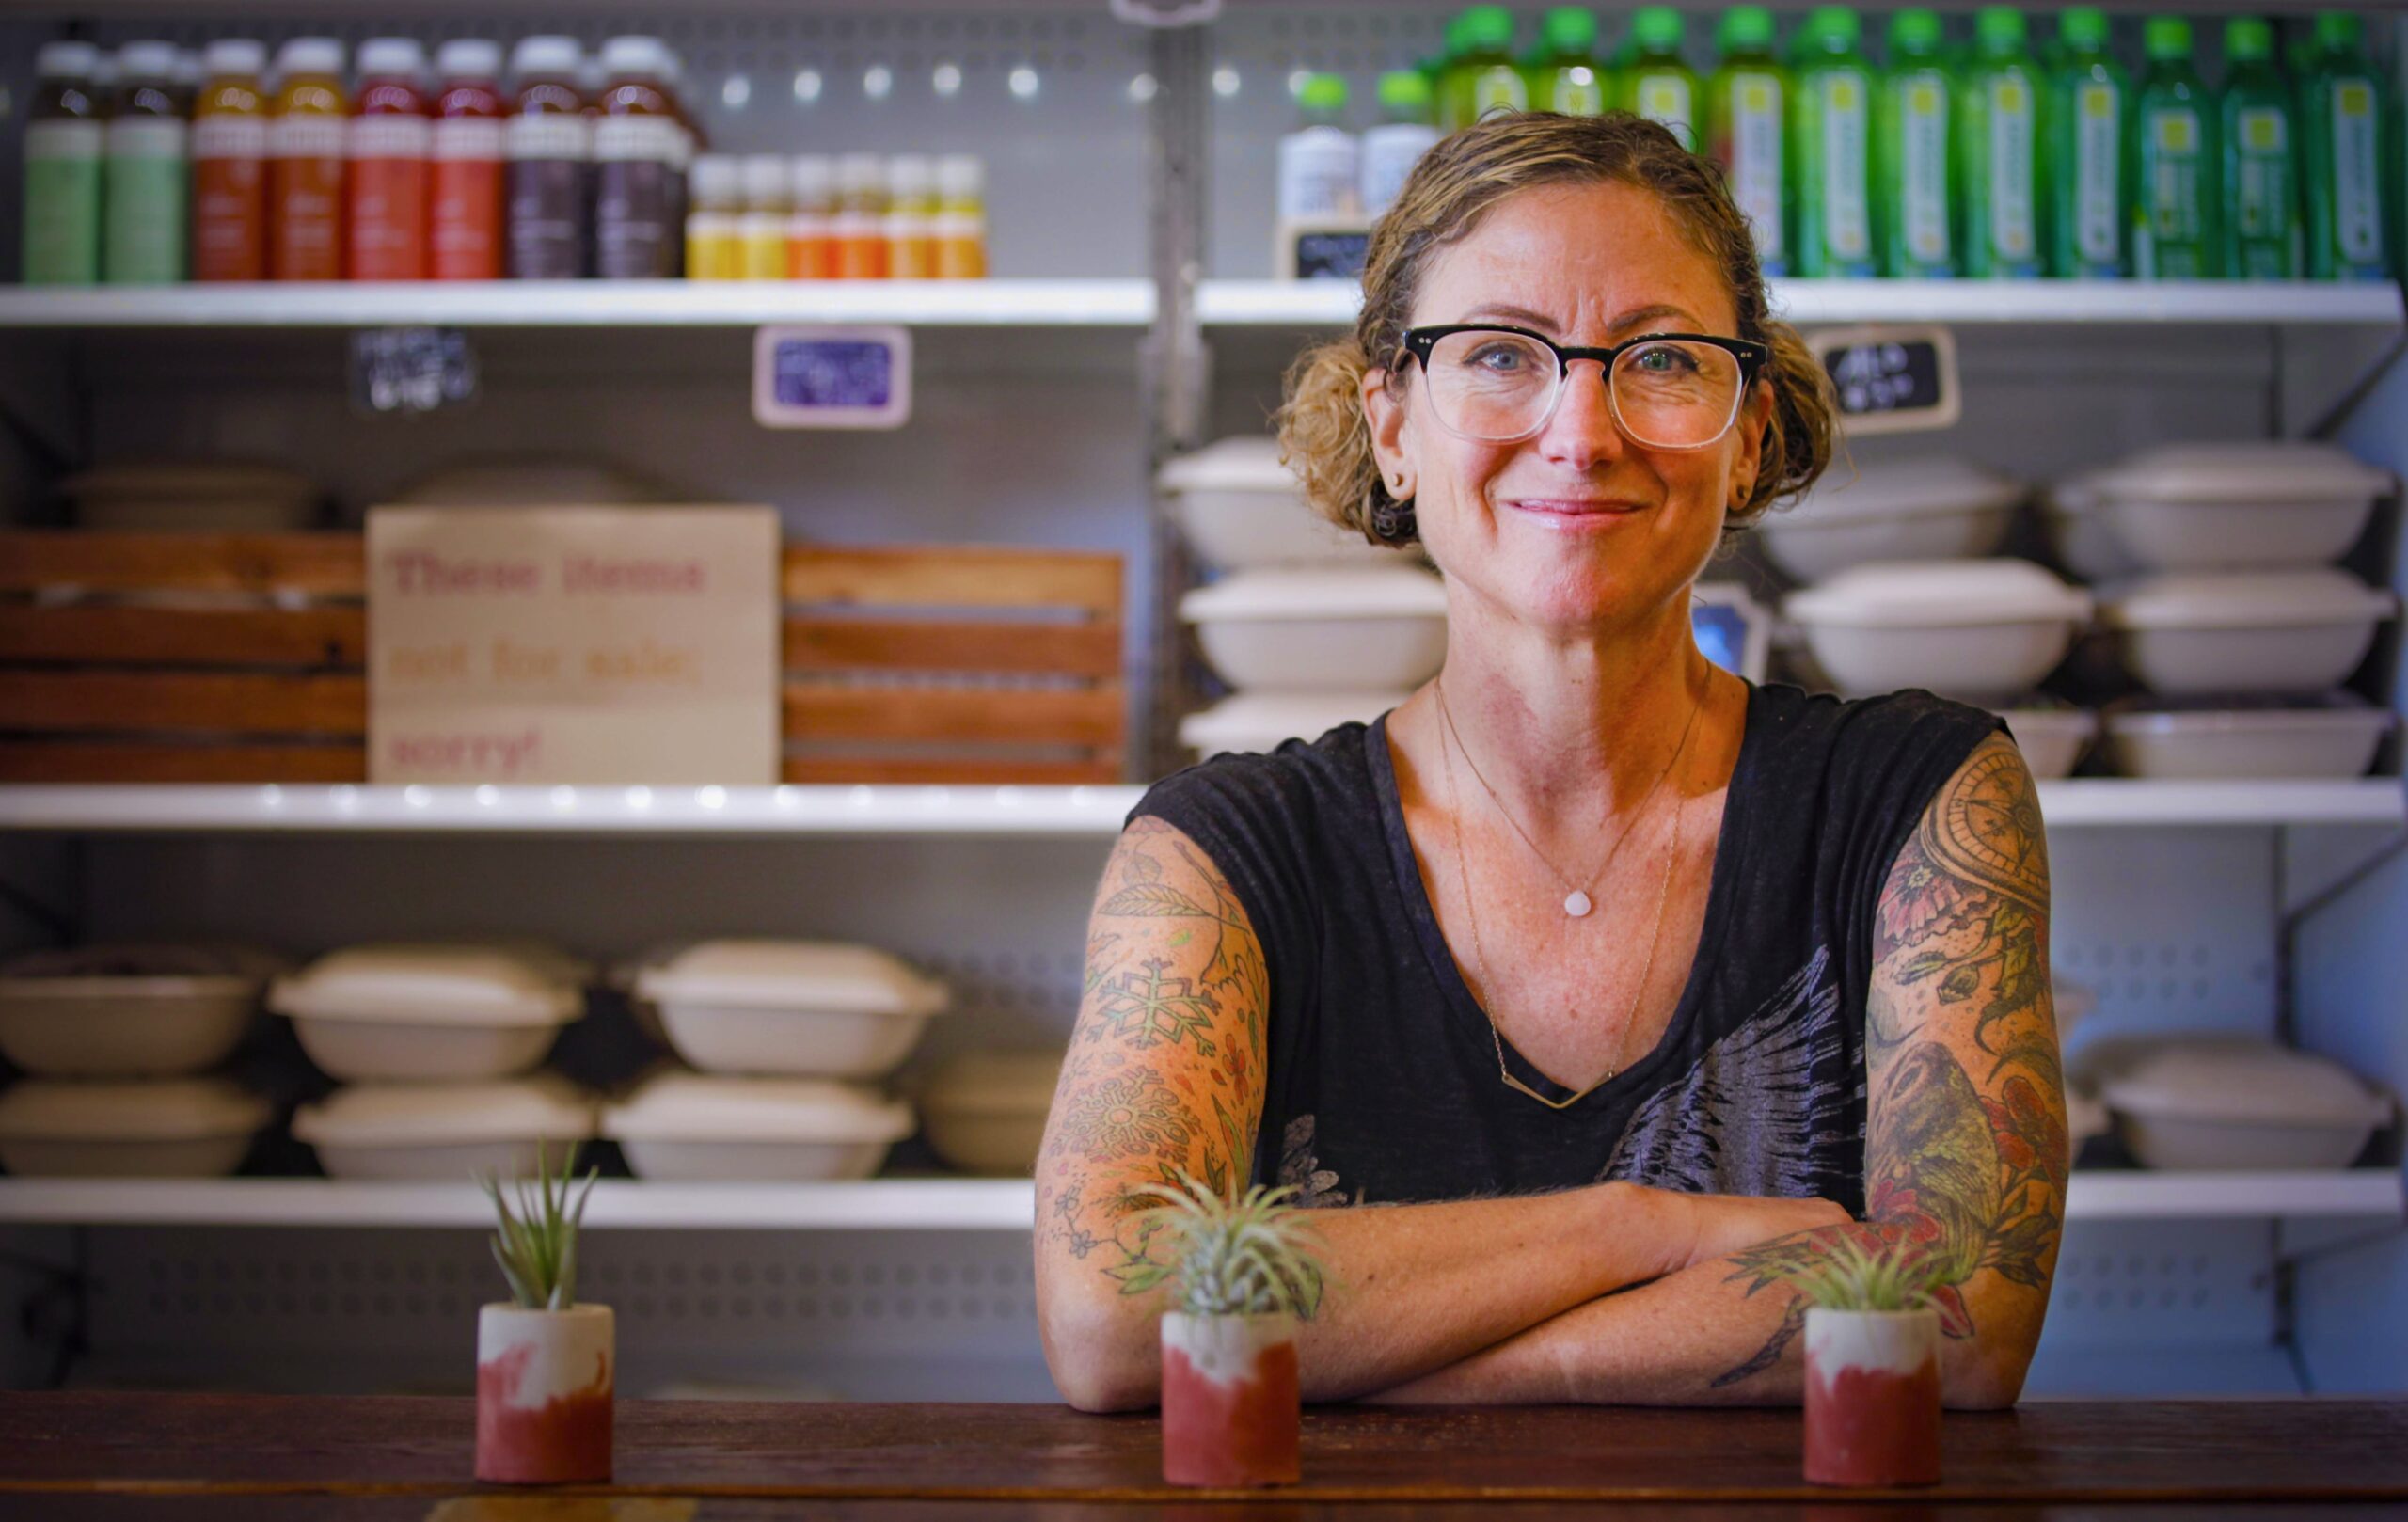 Naomi Crawford, owner of Lunchette in downtown Petaluma which uses compostable containers to package their salads, is a supporter of the styrofoam ban. As part of Climate Action Petaluma, she helped adopt the climate emergency resolution with the city and is an advocate for a zero waste initiative.(CRISSY PASCUAL/ARGUS-COURIER STAFF)